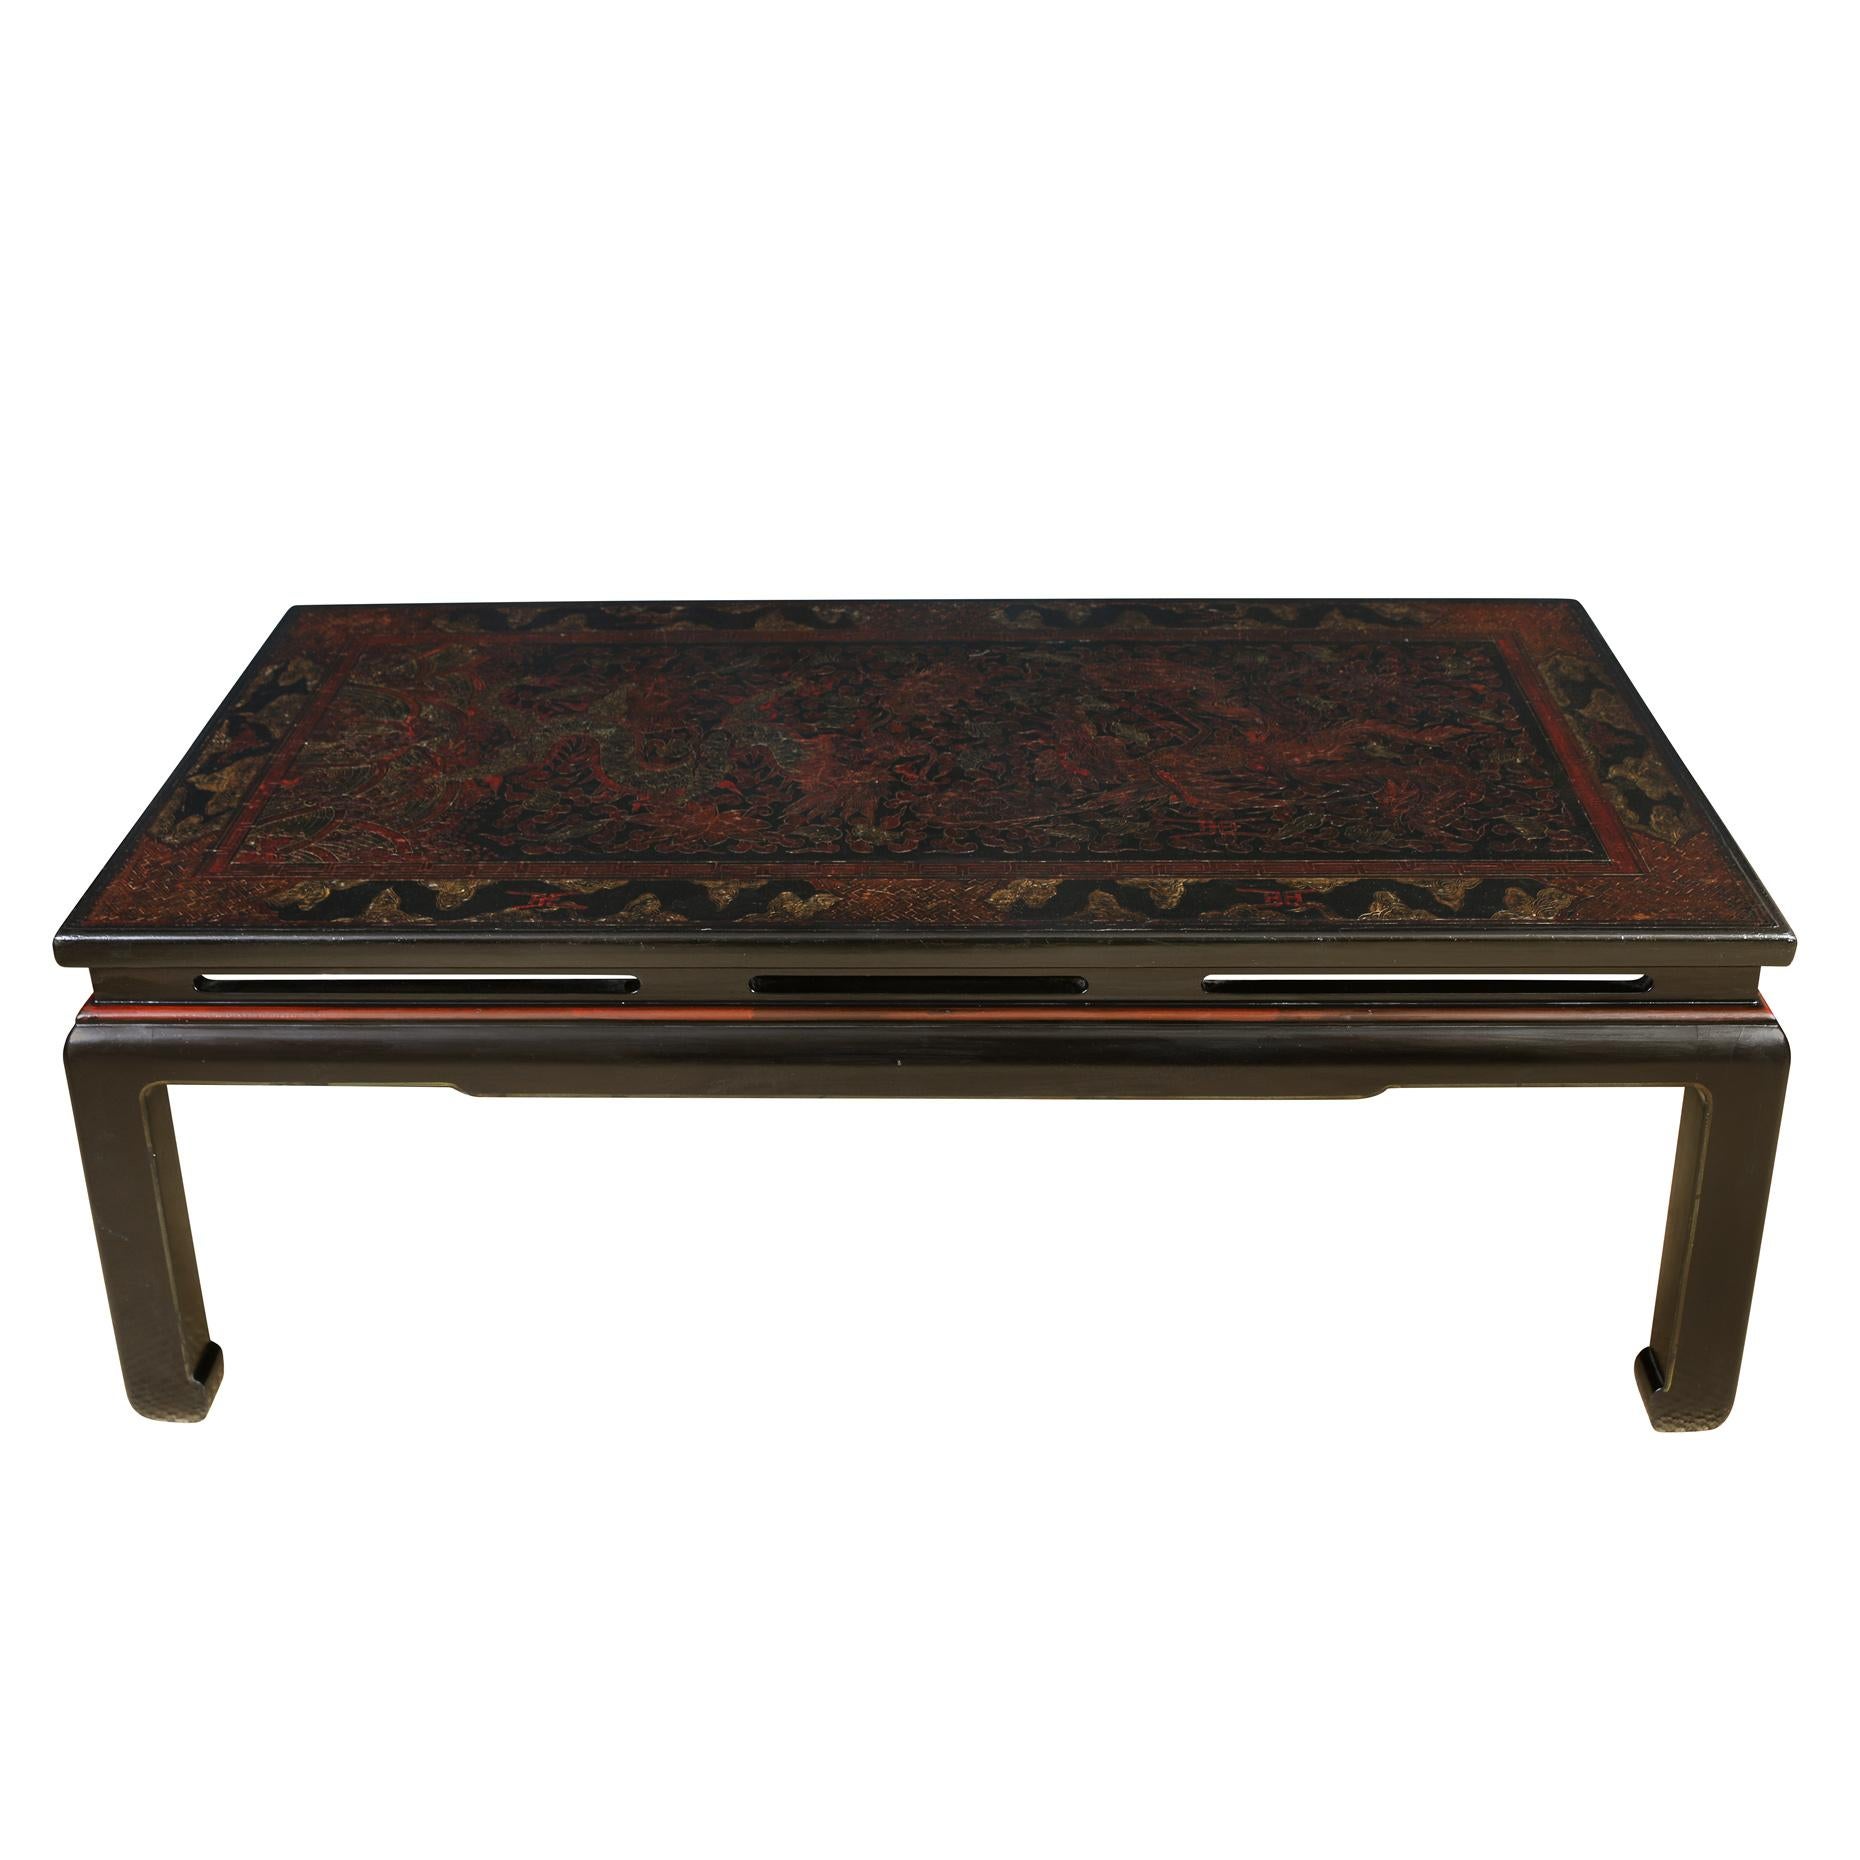 A vintage Chinese black and red lacquer etched coffee table.  The rectangular dark table features a top etched with geometric and floral chinoiserie shapes and phoenix designs with red accents and sits on Ming shaped legs 